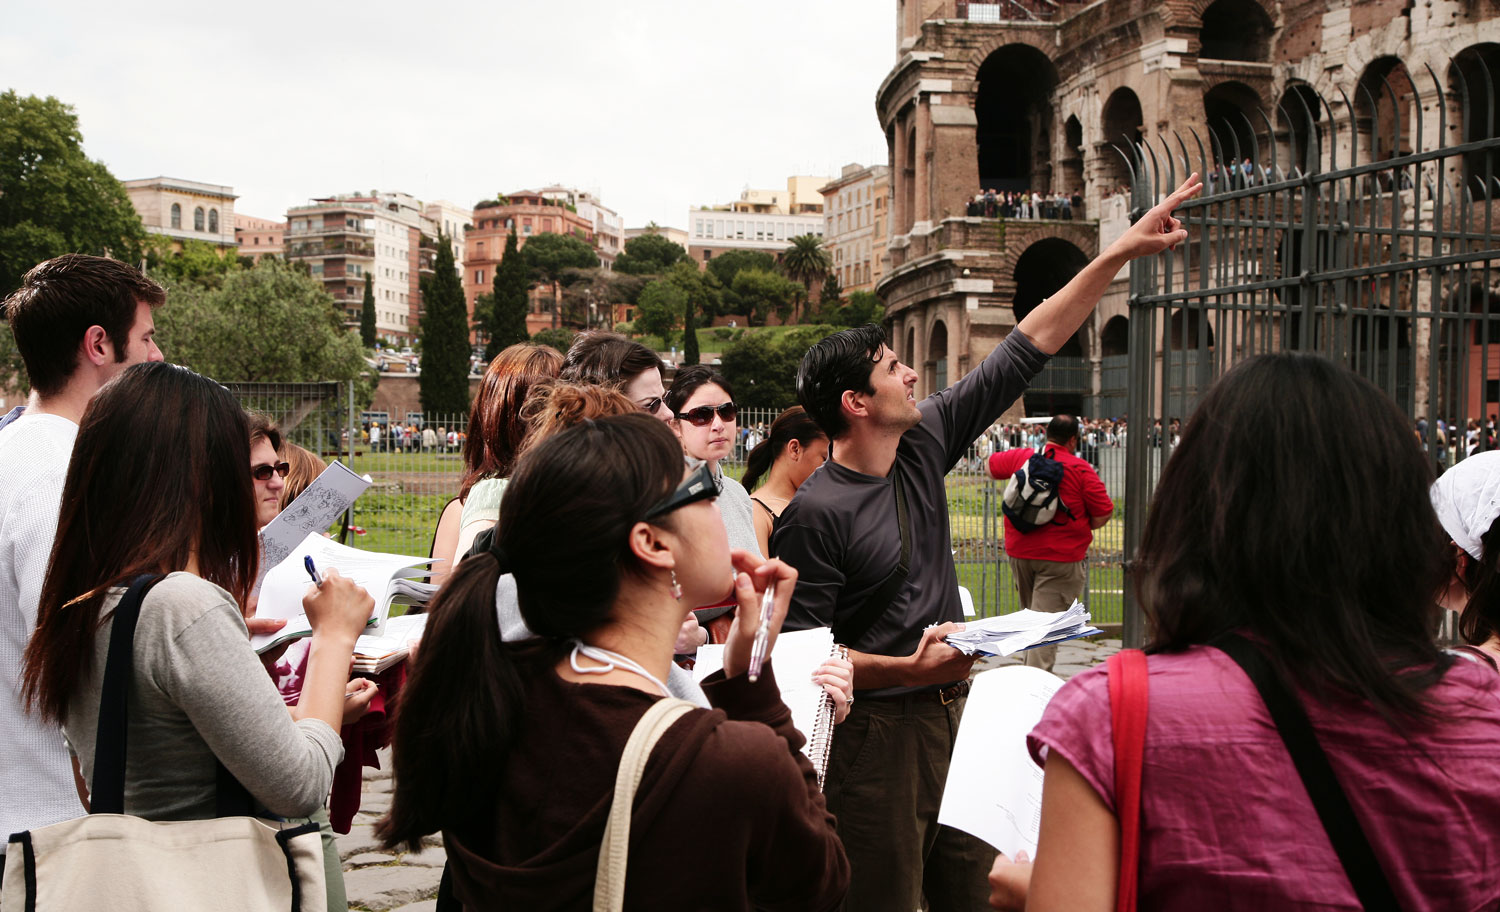 A teacher pointing to a monument in front of other students